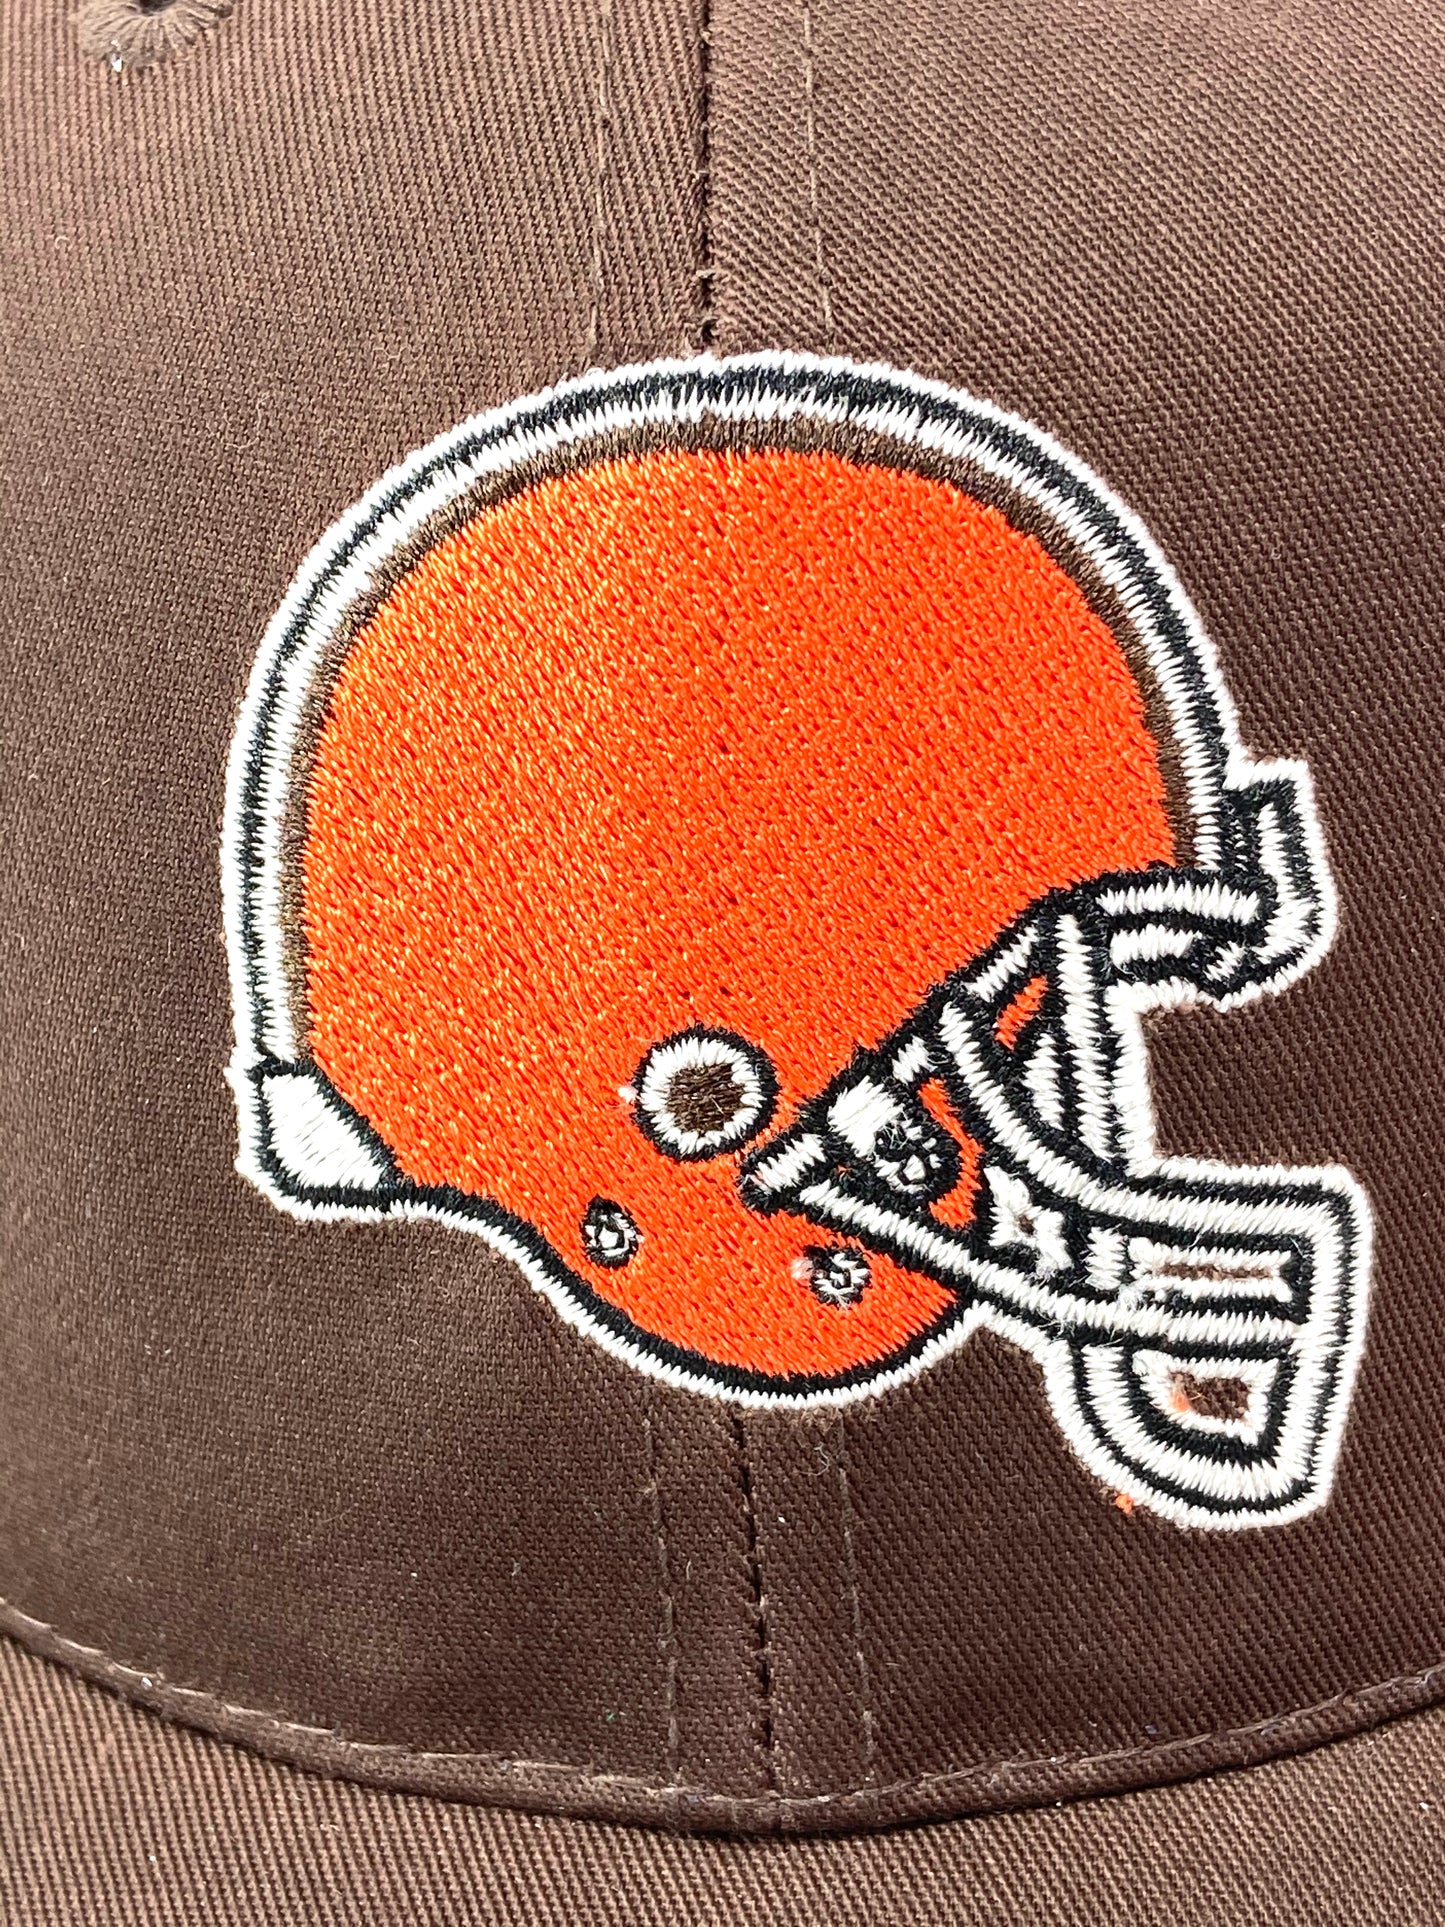 Cleveland Browns Vintage NFL Brown Youth Logo Snapback by Annco